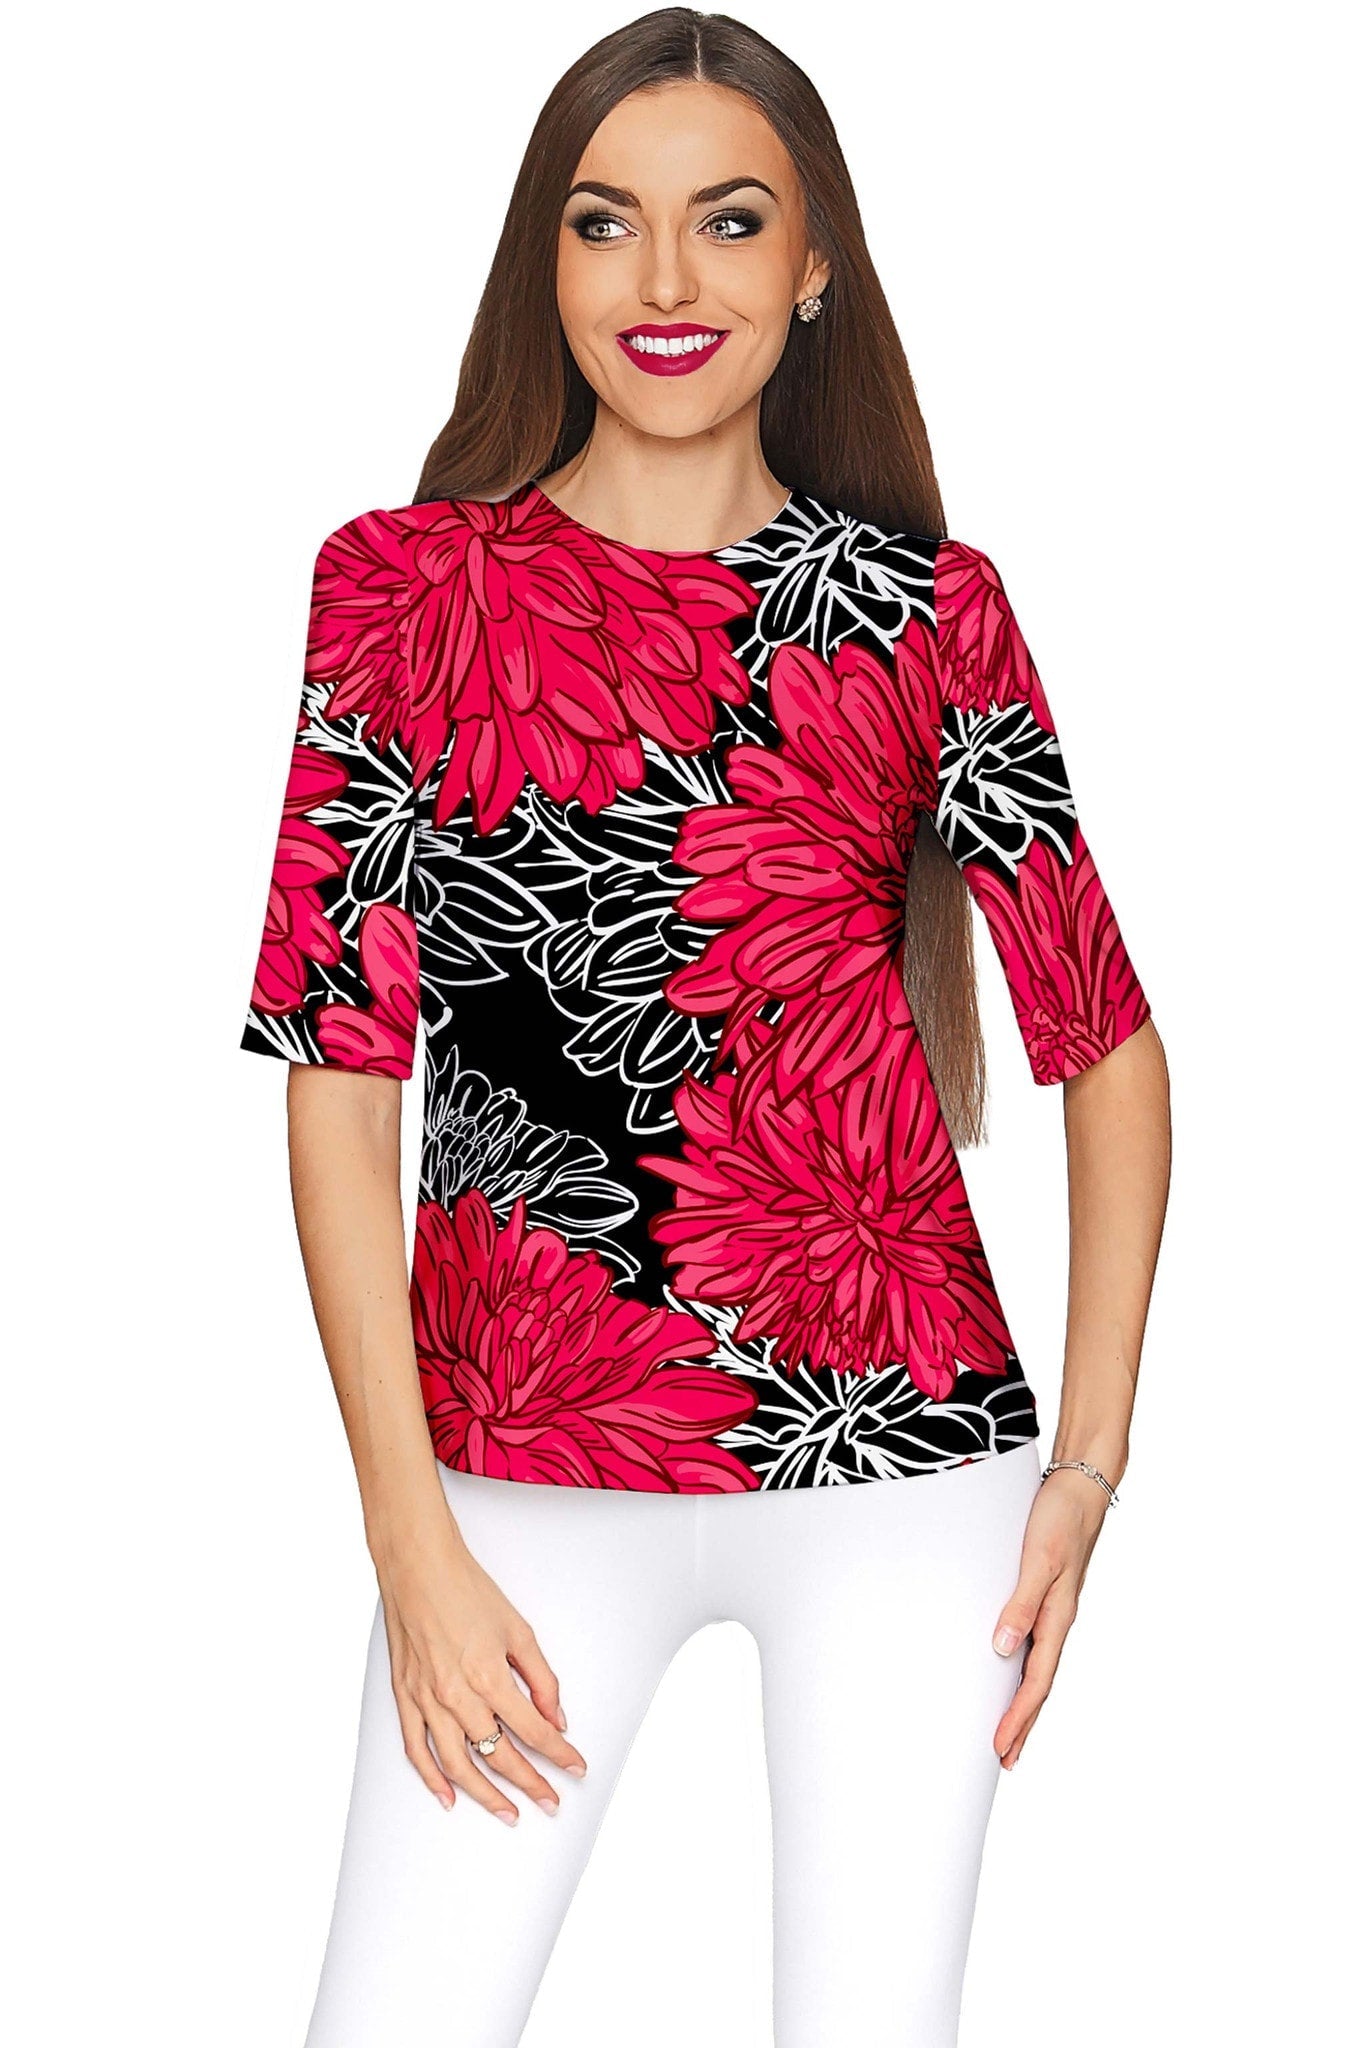 Hit The Mark Sophia Black Floral Sleeved Party Top - Women